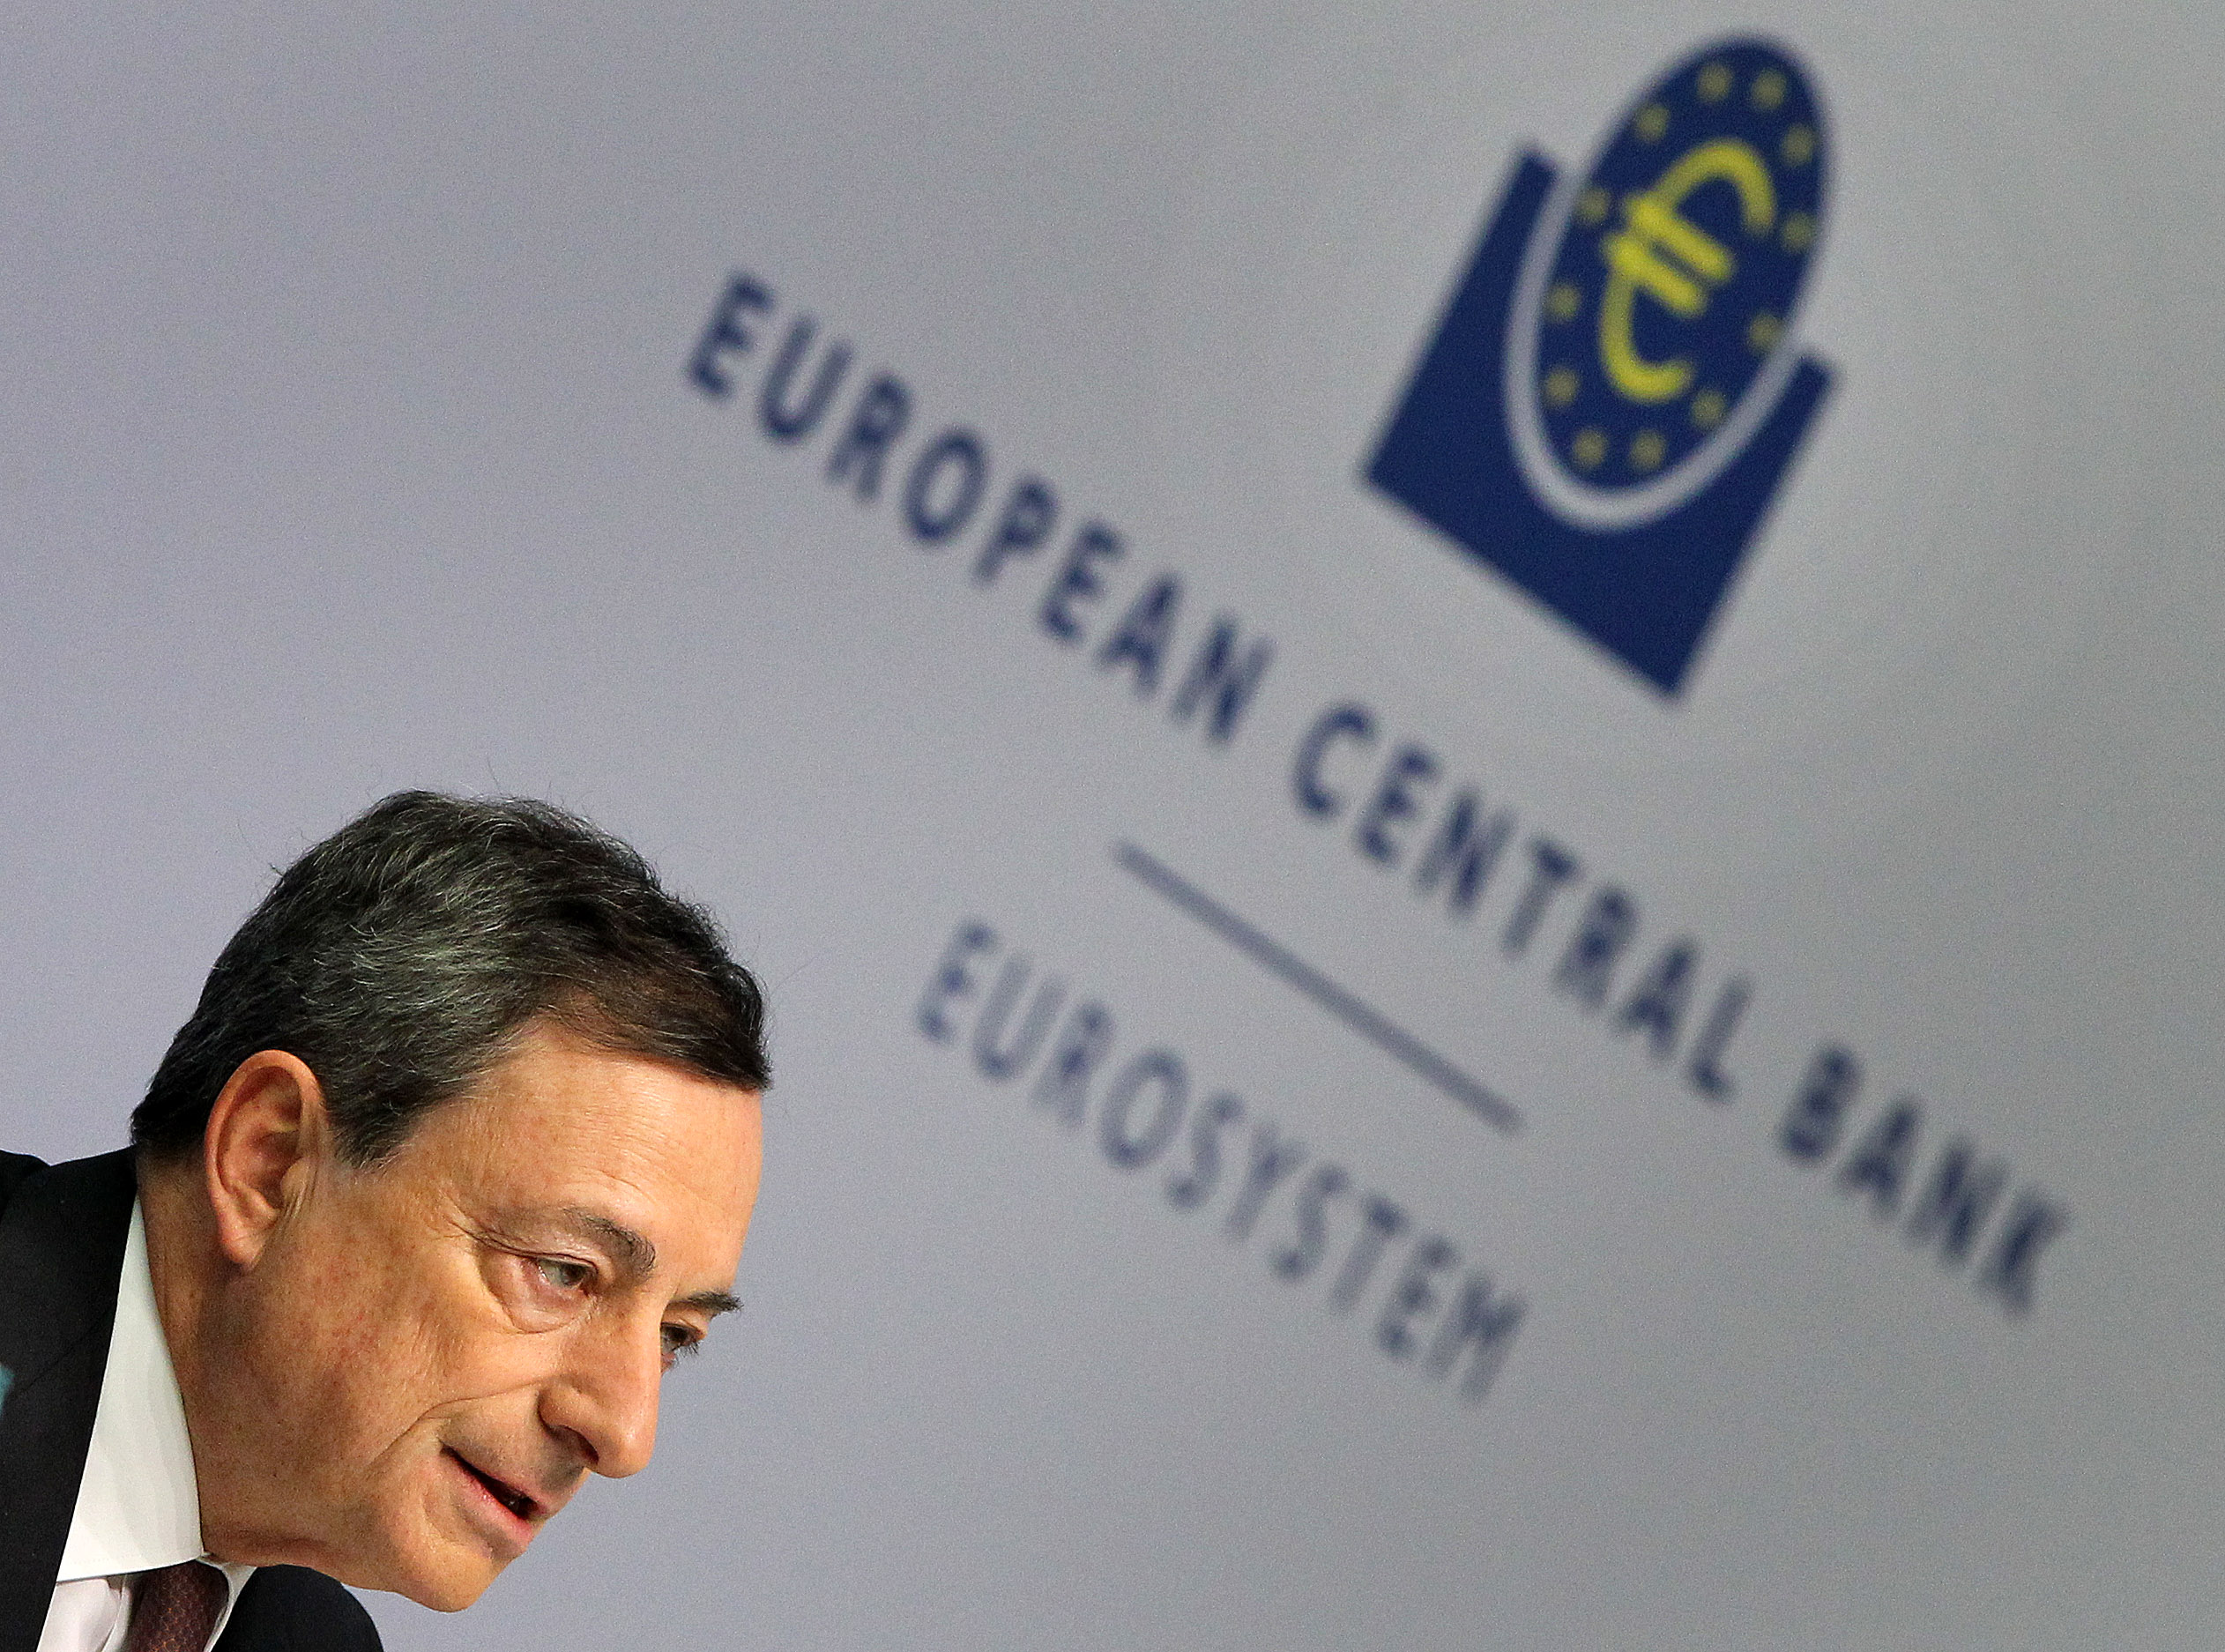 Mario Draghi, President of the European Central Bank (ECB) addresses a press conference following the meeting of the Governing Council in Frankfurt am Main, western Germany, on January 21, 2016. The ECB left its key interest rates unchanged at its first policy meeting of the year, despite current volatility on the world's financial markets owing to concerns about the slowing Chinese economy. / AFP / DANIEL ROLAND